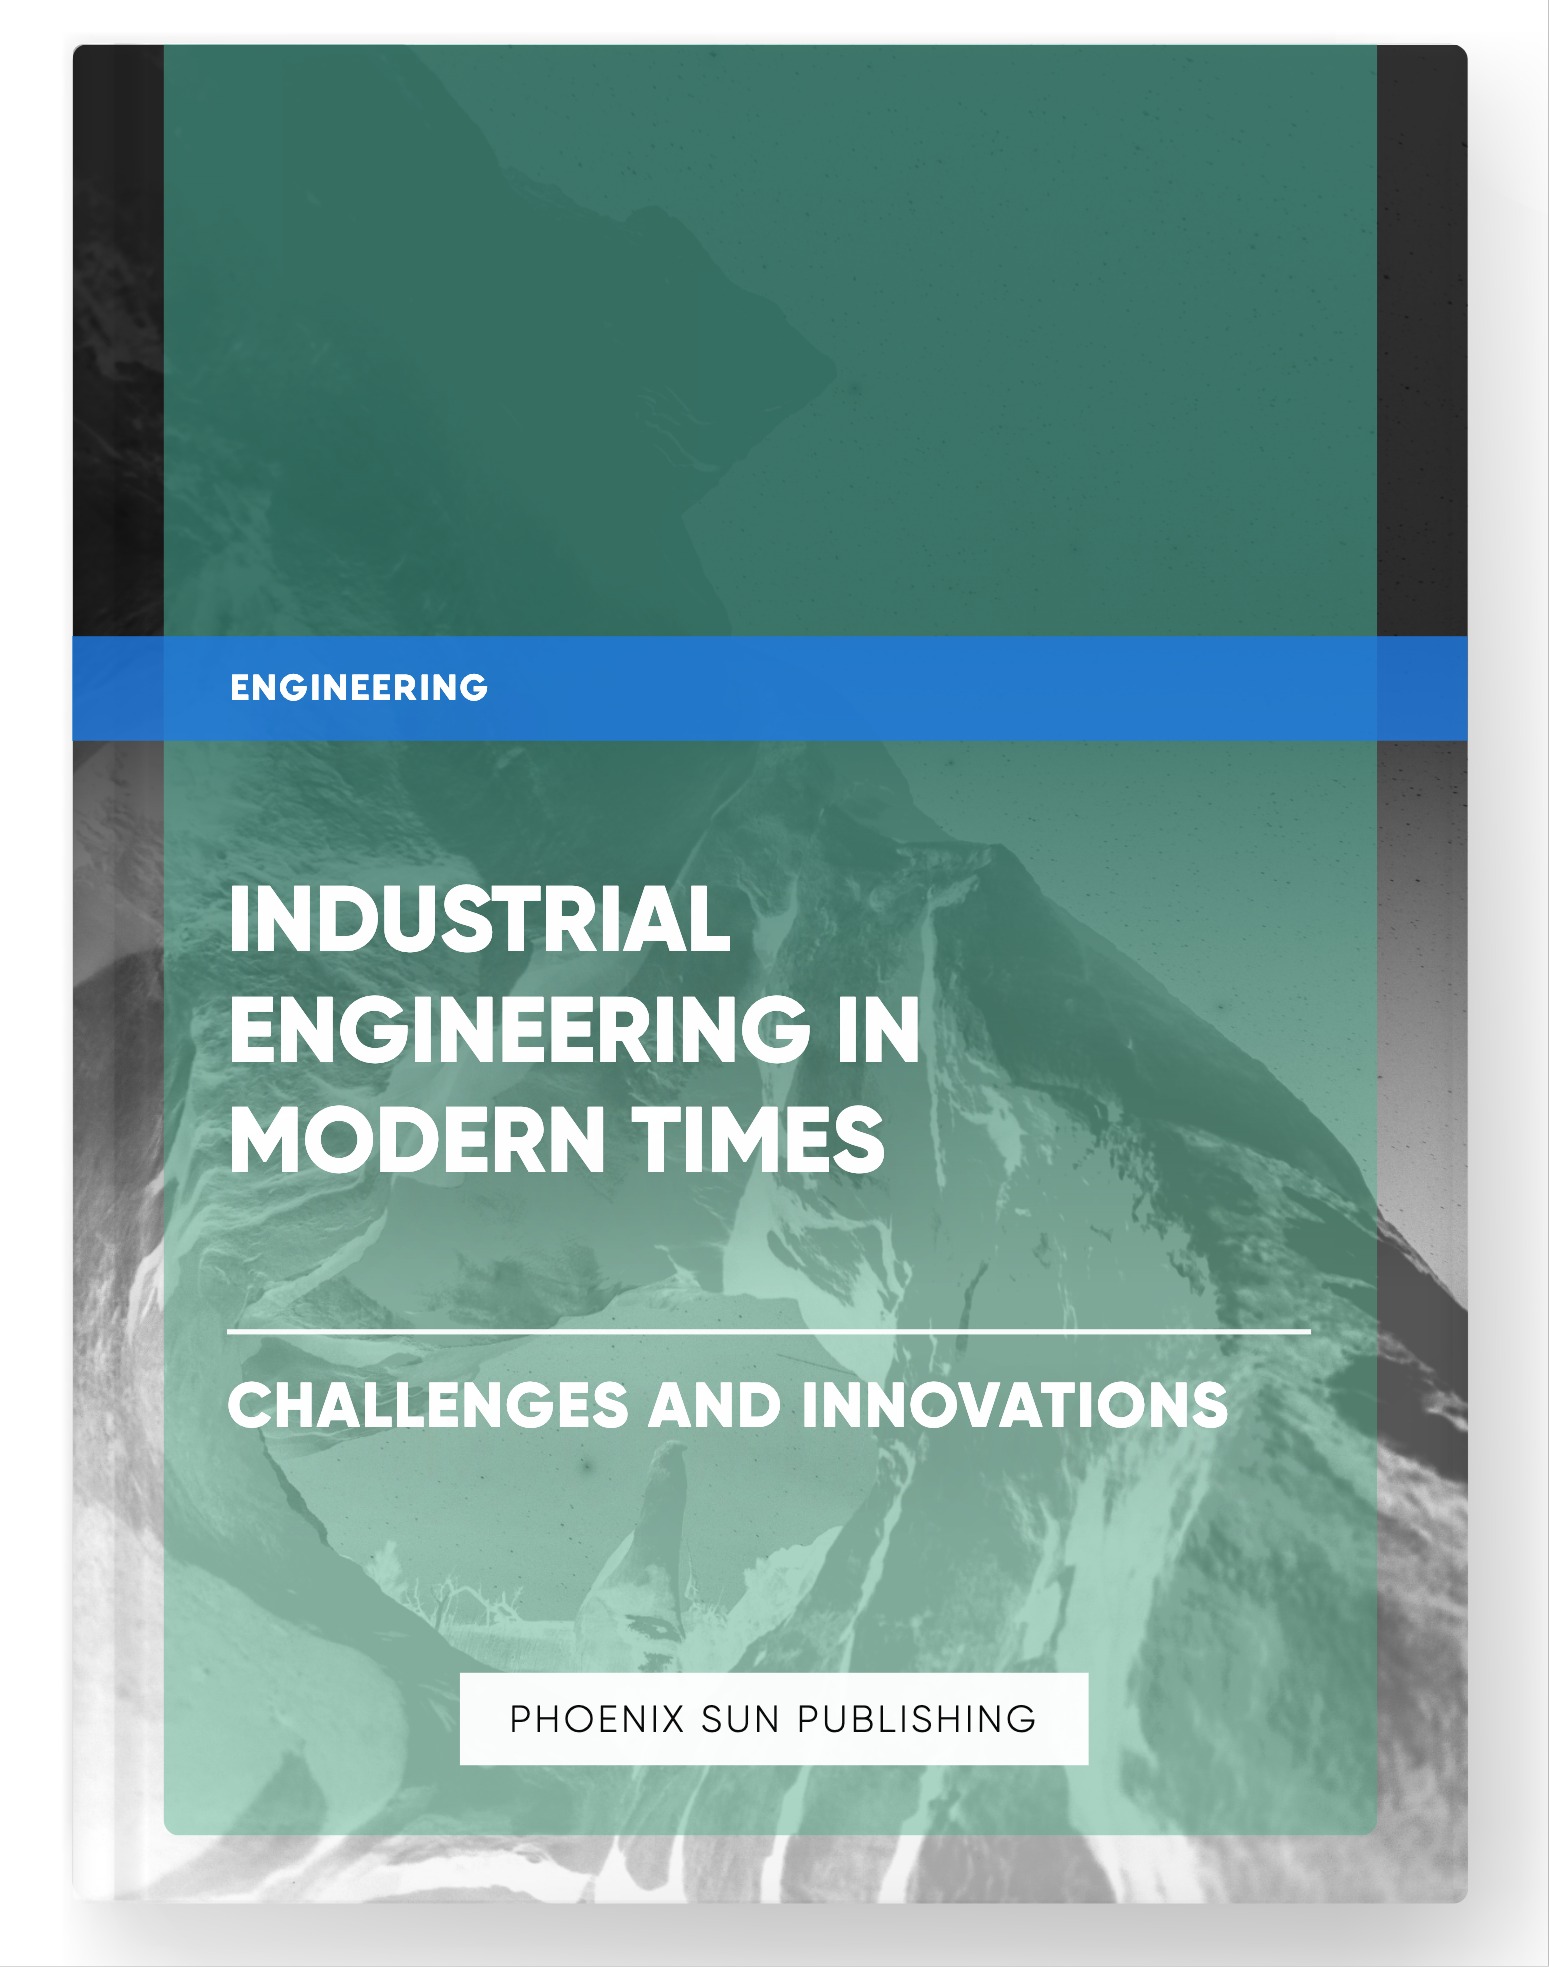 Industrial Engineering in Modern Times – Challenges and Innovations